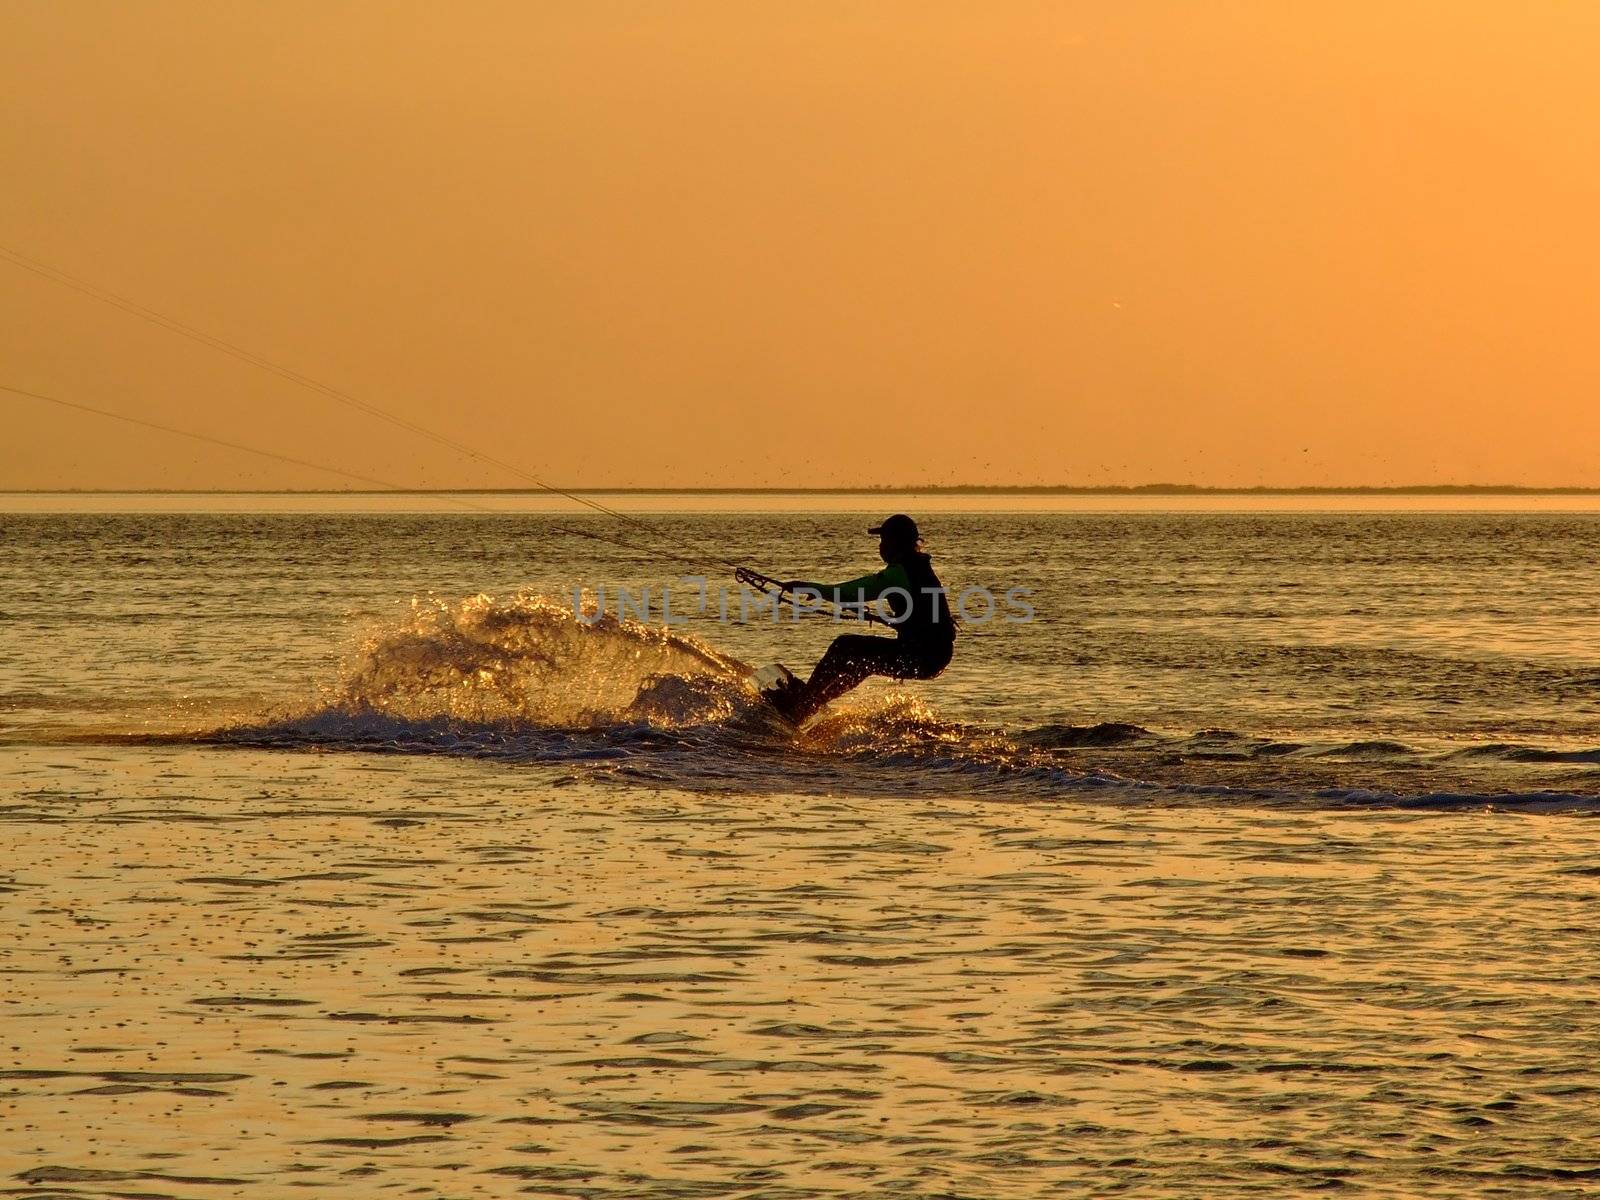 Silhouette of a kitesurf on a gulf on a sunset 2